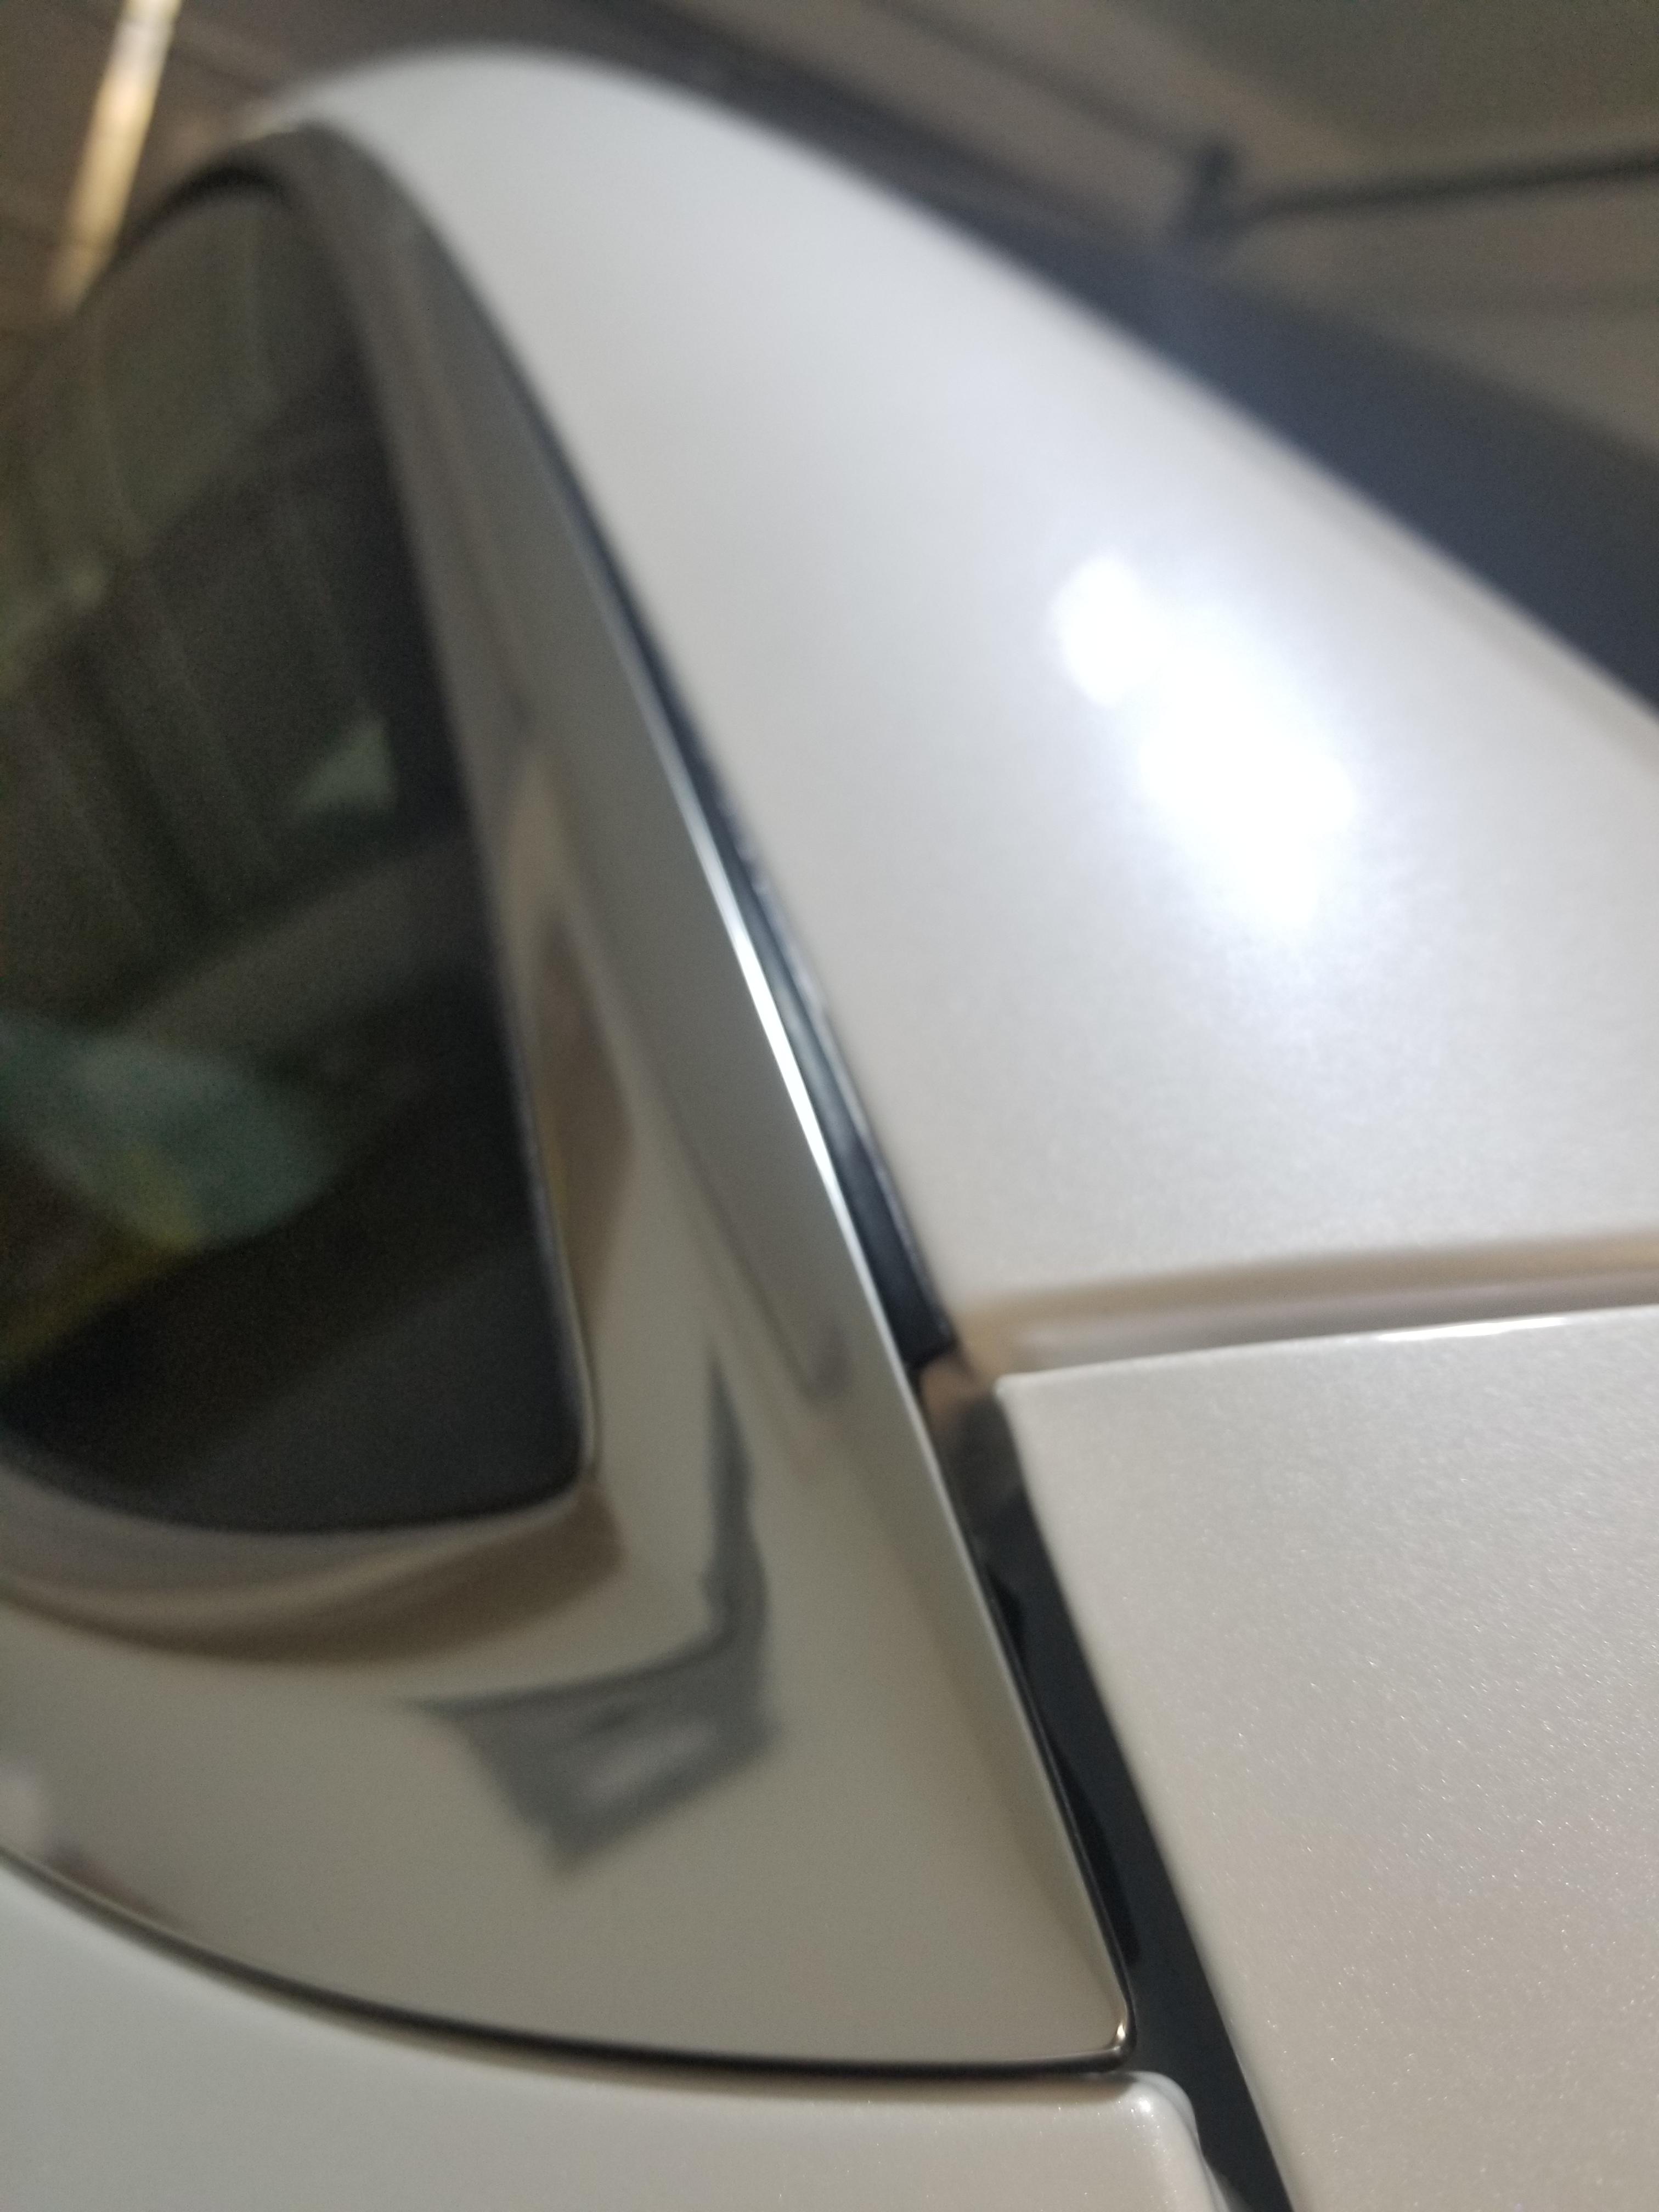 Tesla Model 3 Performance Shows “Bad Build Quality” In Extensive Photo ...